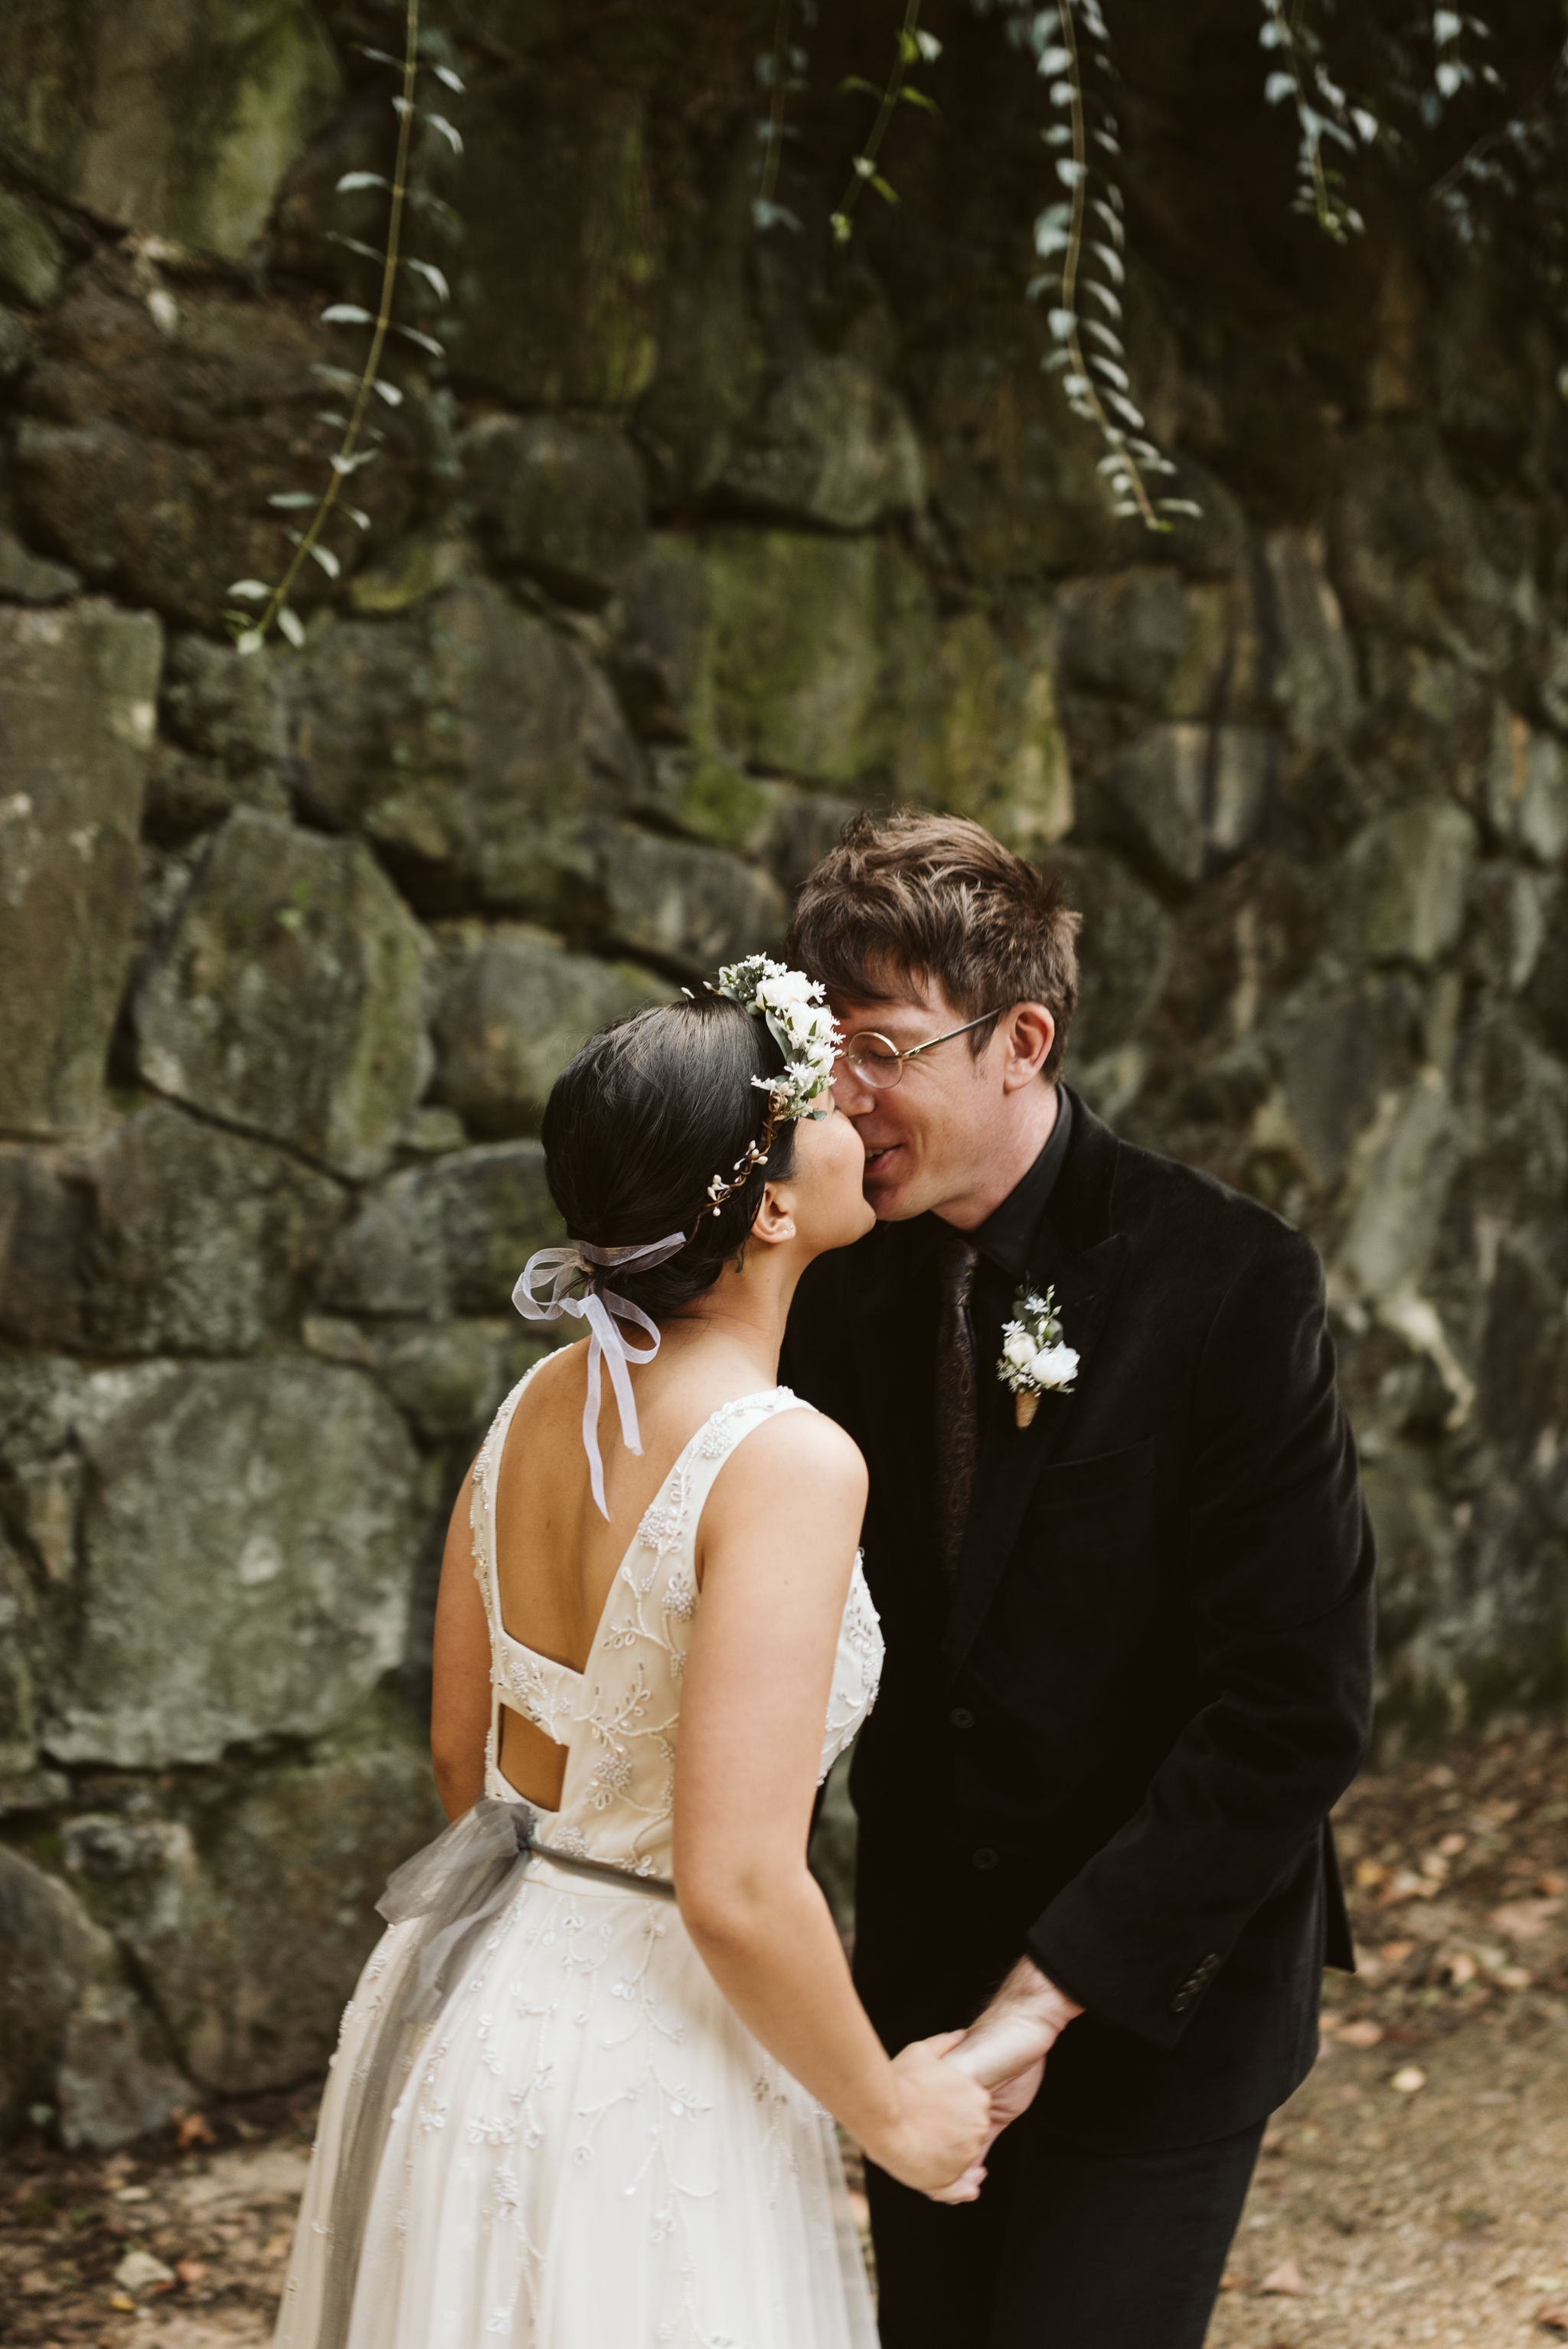  Baltimore, Maryland Wedding Photographer, The Mansion House at the Maryland Zoo, Relaxed, Romantic, Laid Back, Bride and Groom Kissing Outdoors, Flower Crown, Wedding Dress with Back Cutout 